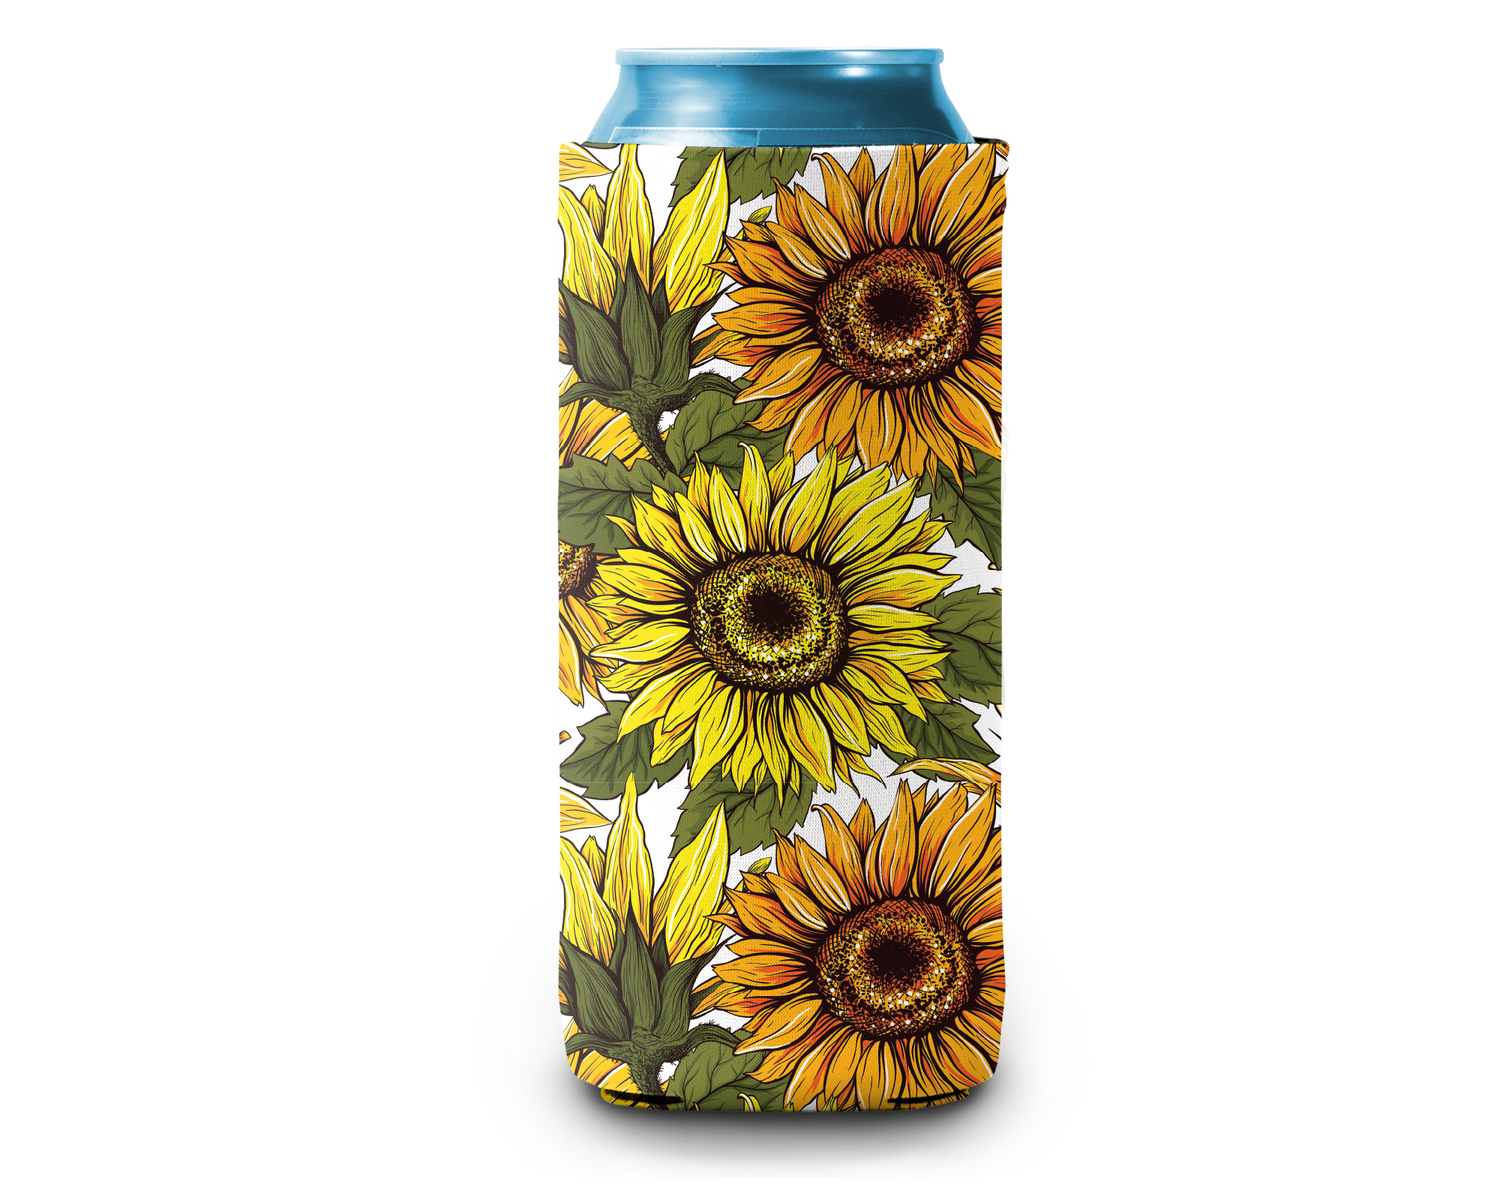 Slim Can Cooler by Skumps with sunflowers